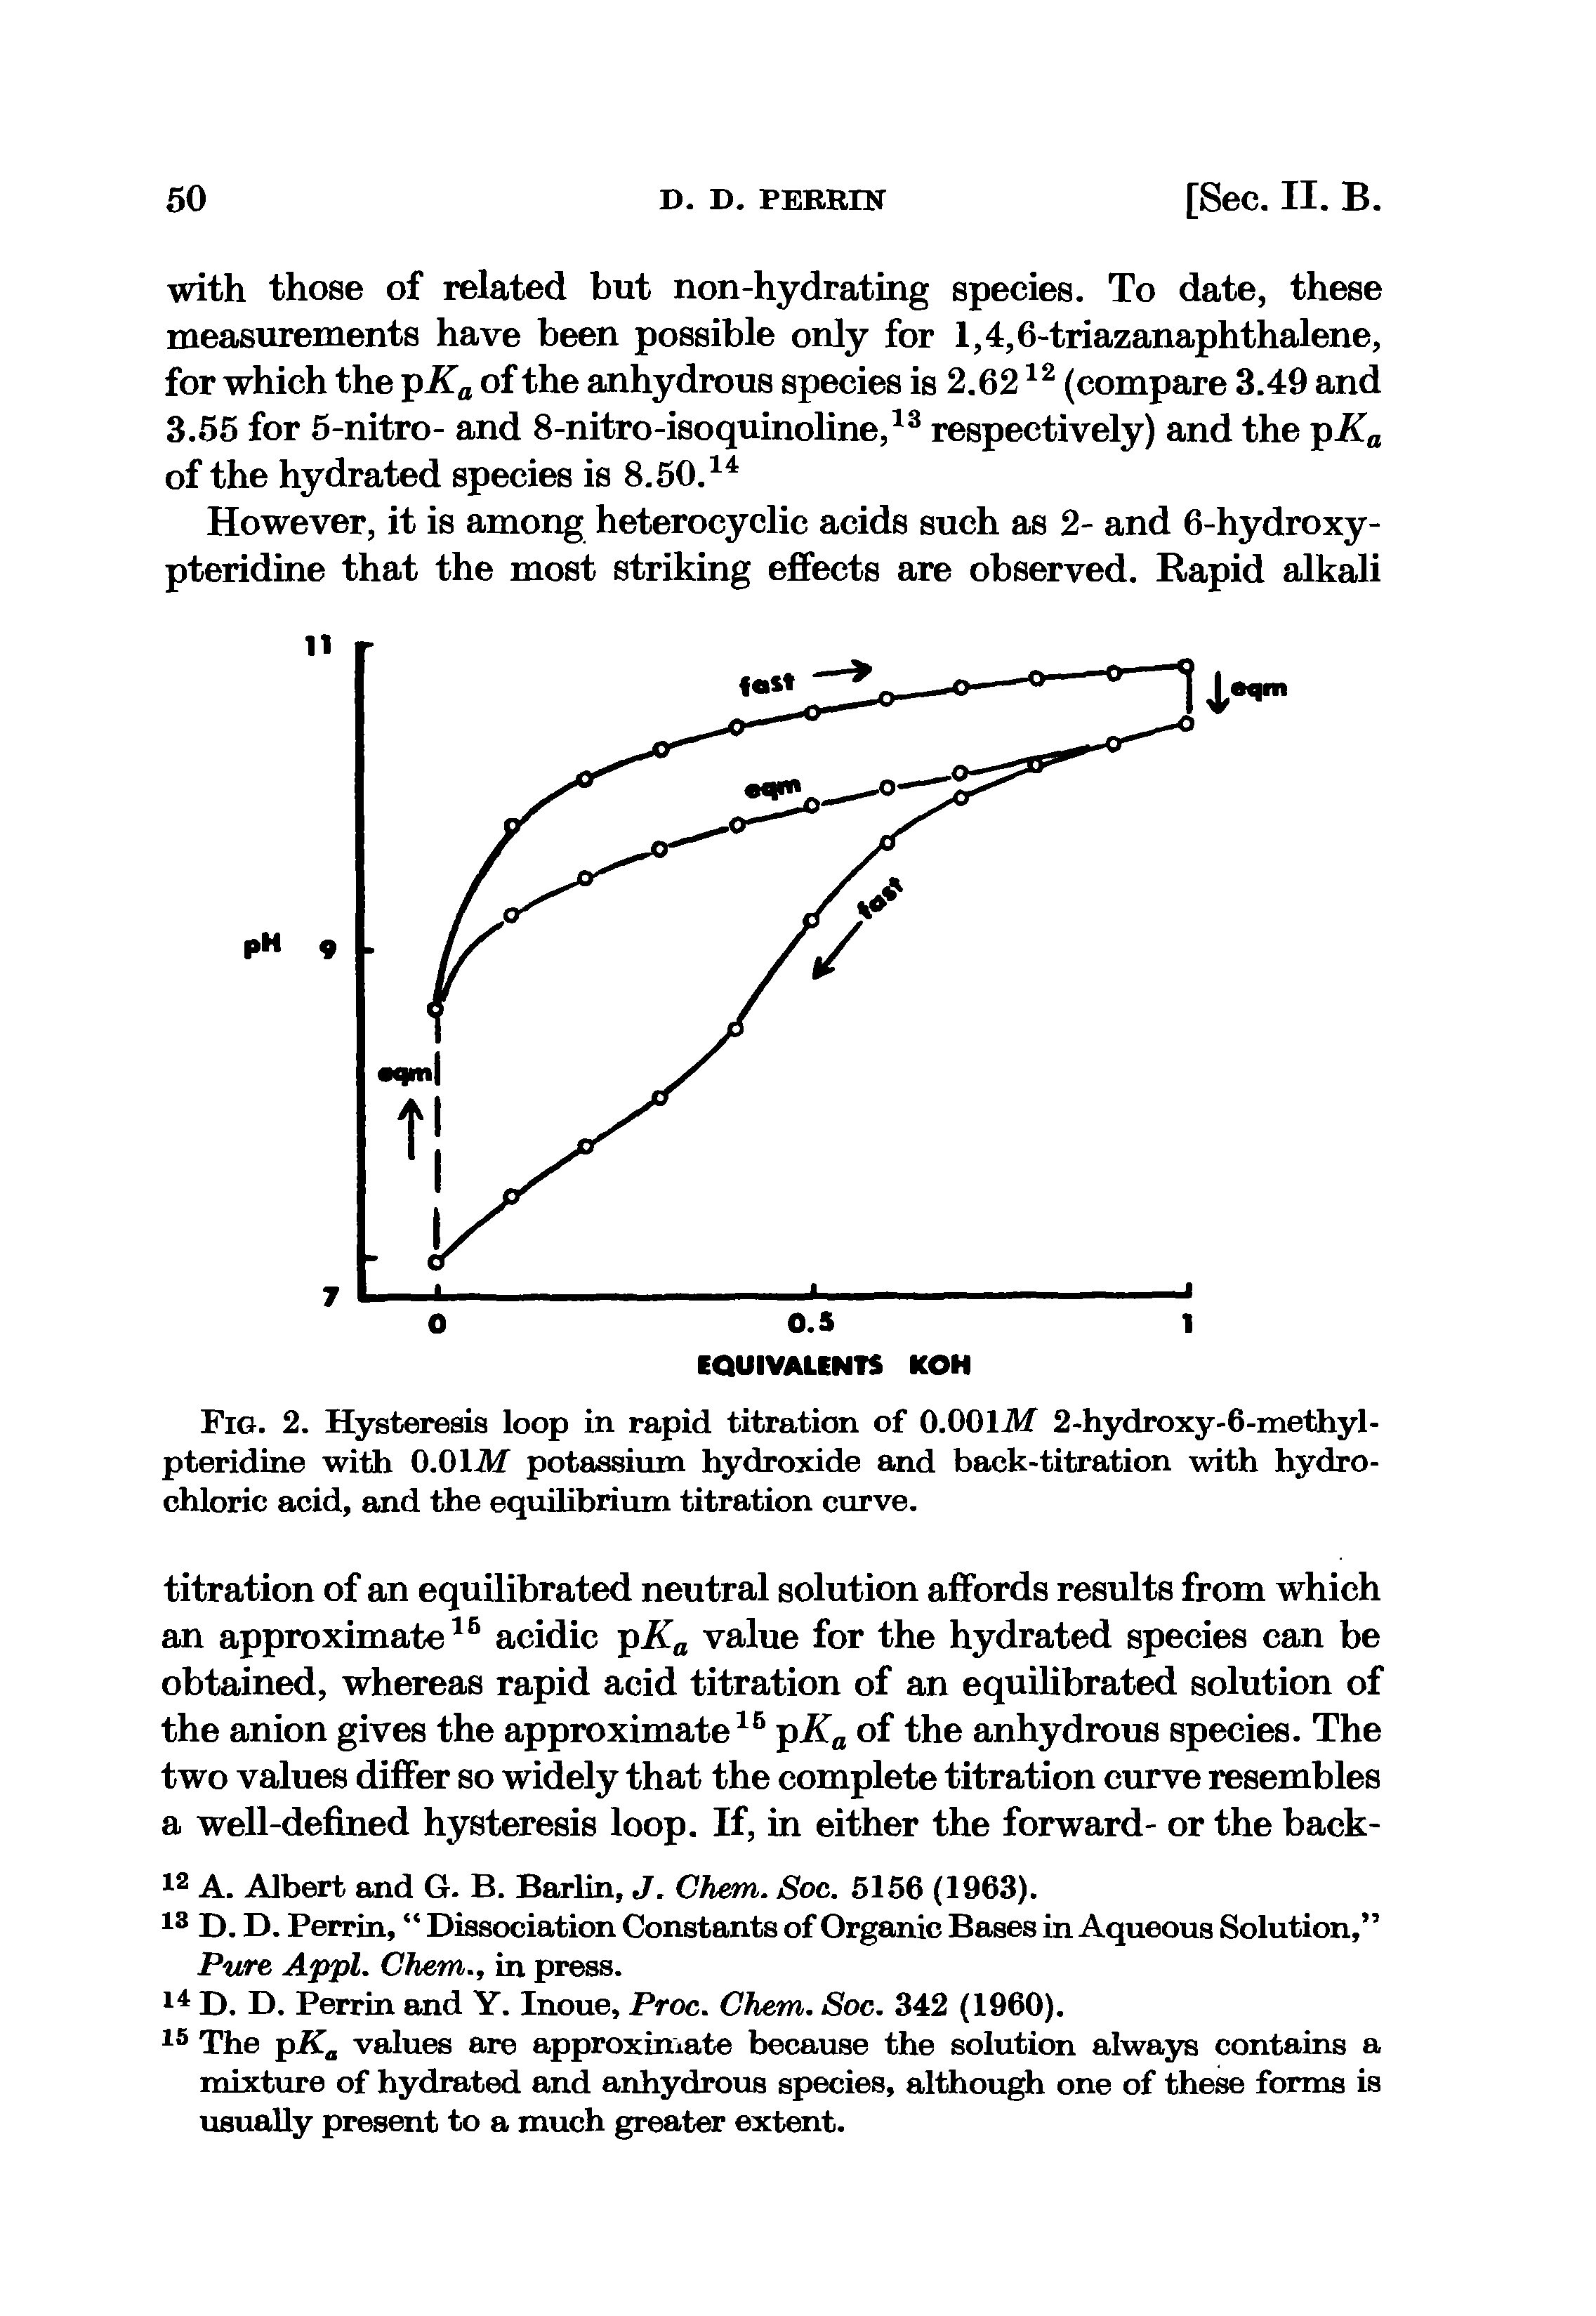 Fig. 2. Hysteresis loop in rapid titration of O.OOlM 2-hydroxy-6-methyl-pteridine with 0.01-M potassium hydroxide and back-titration with hydrochloric acid, and the equilibrium titration curve.